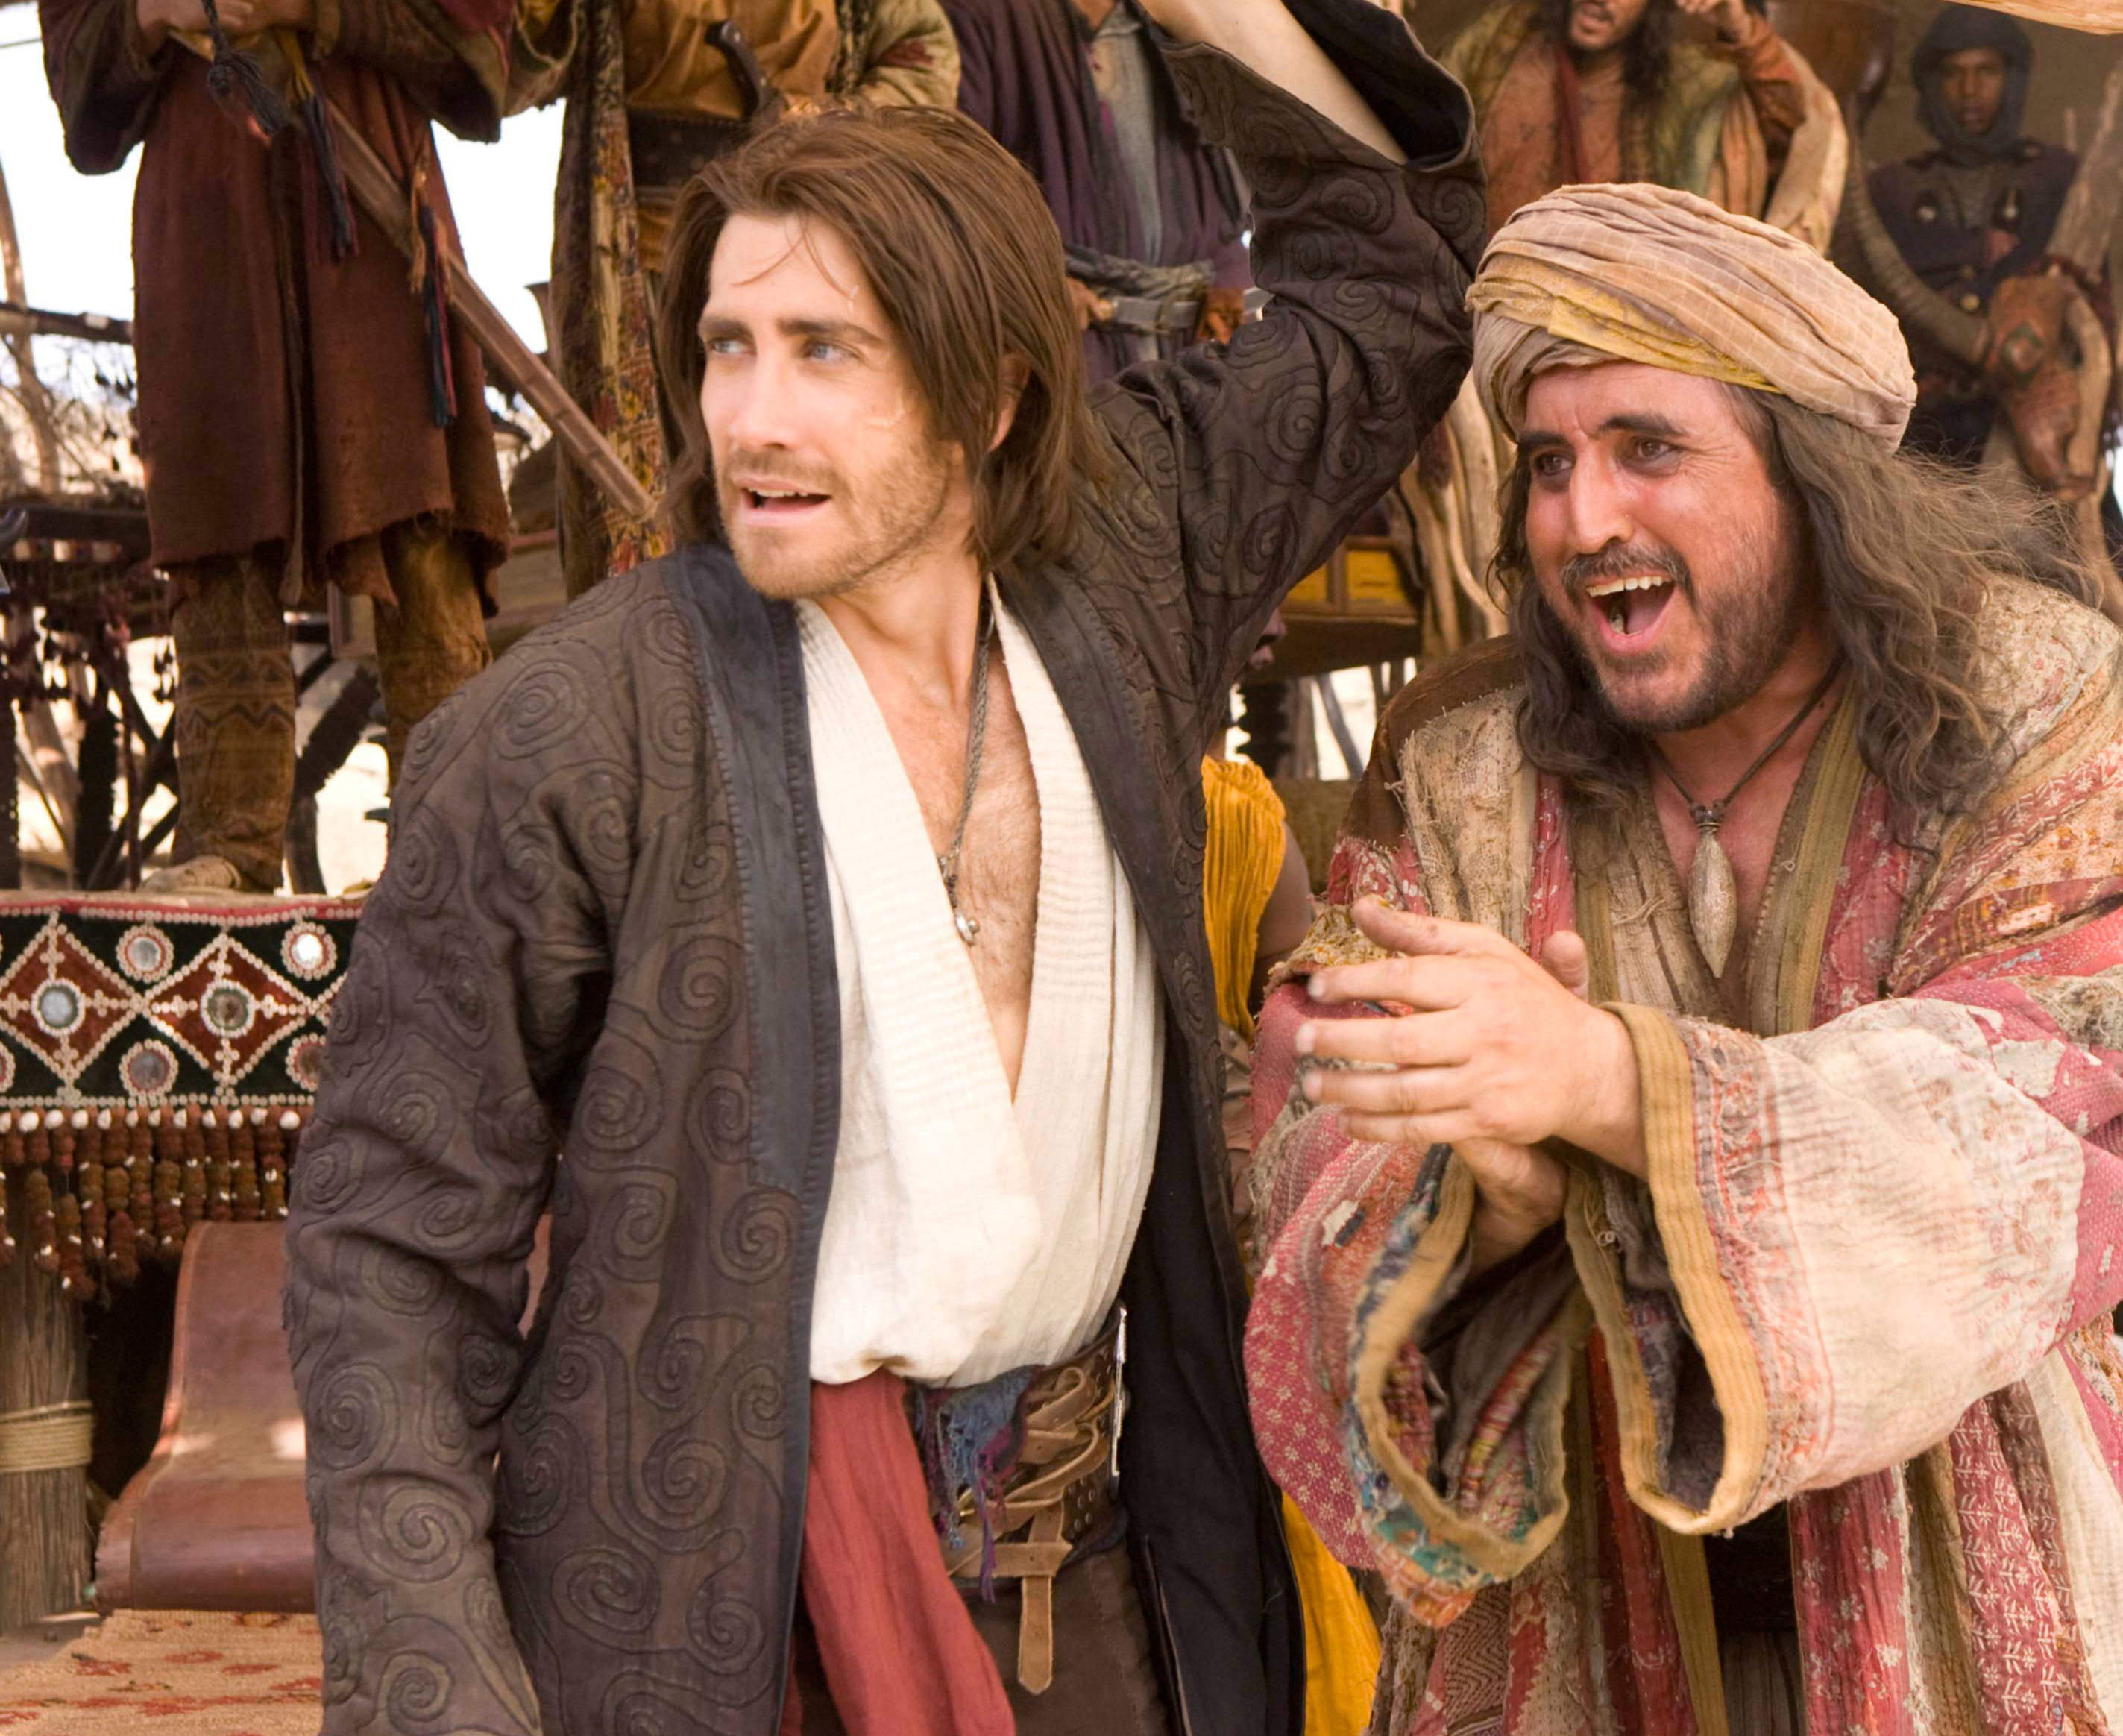 Jake Gyllenhaal&#x27;s character Dastan stands next to Alfred Molina, who plays Sheik Amar